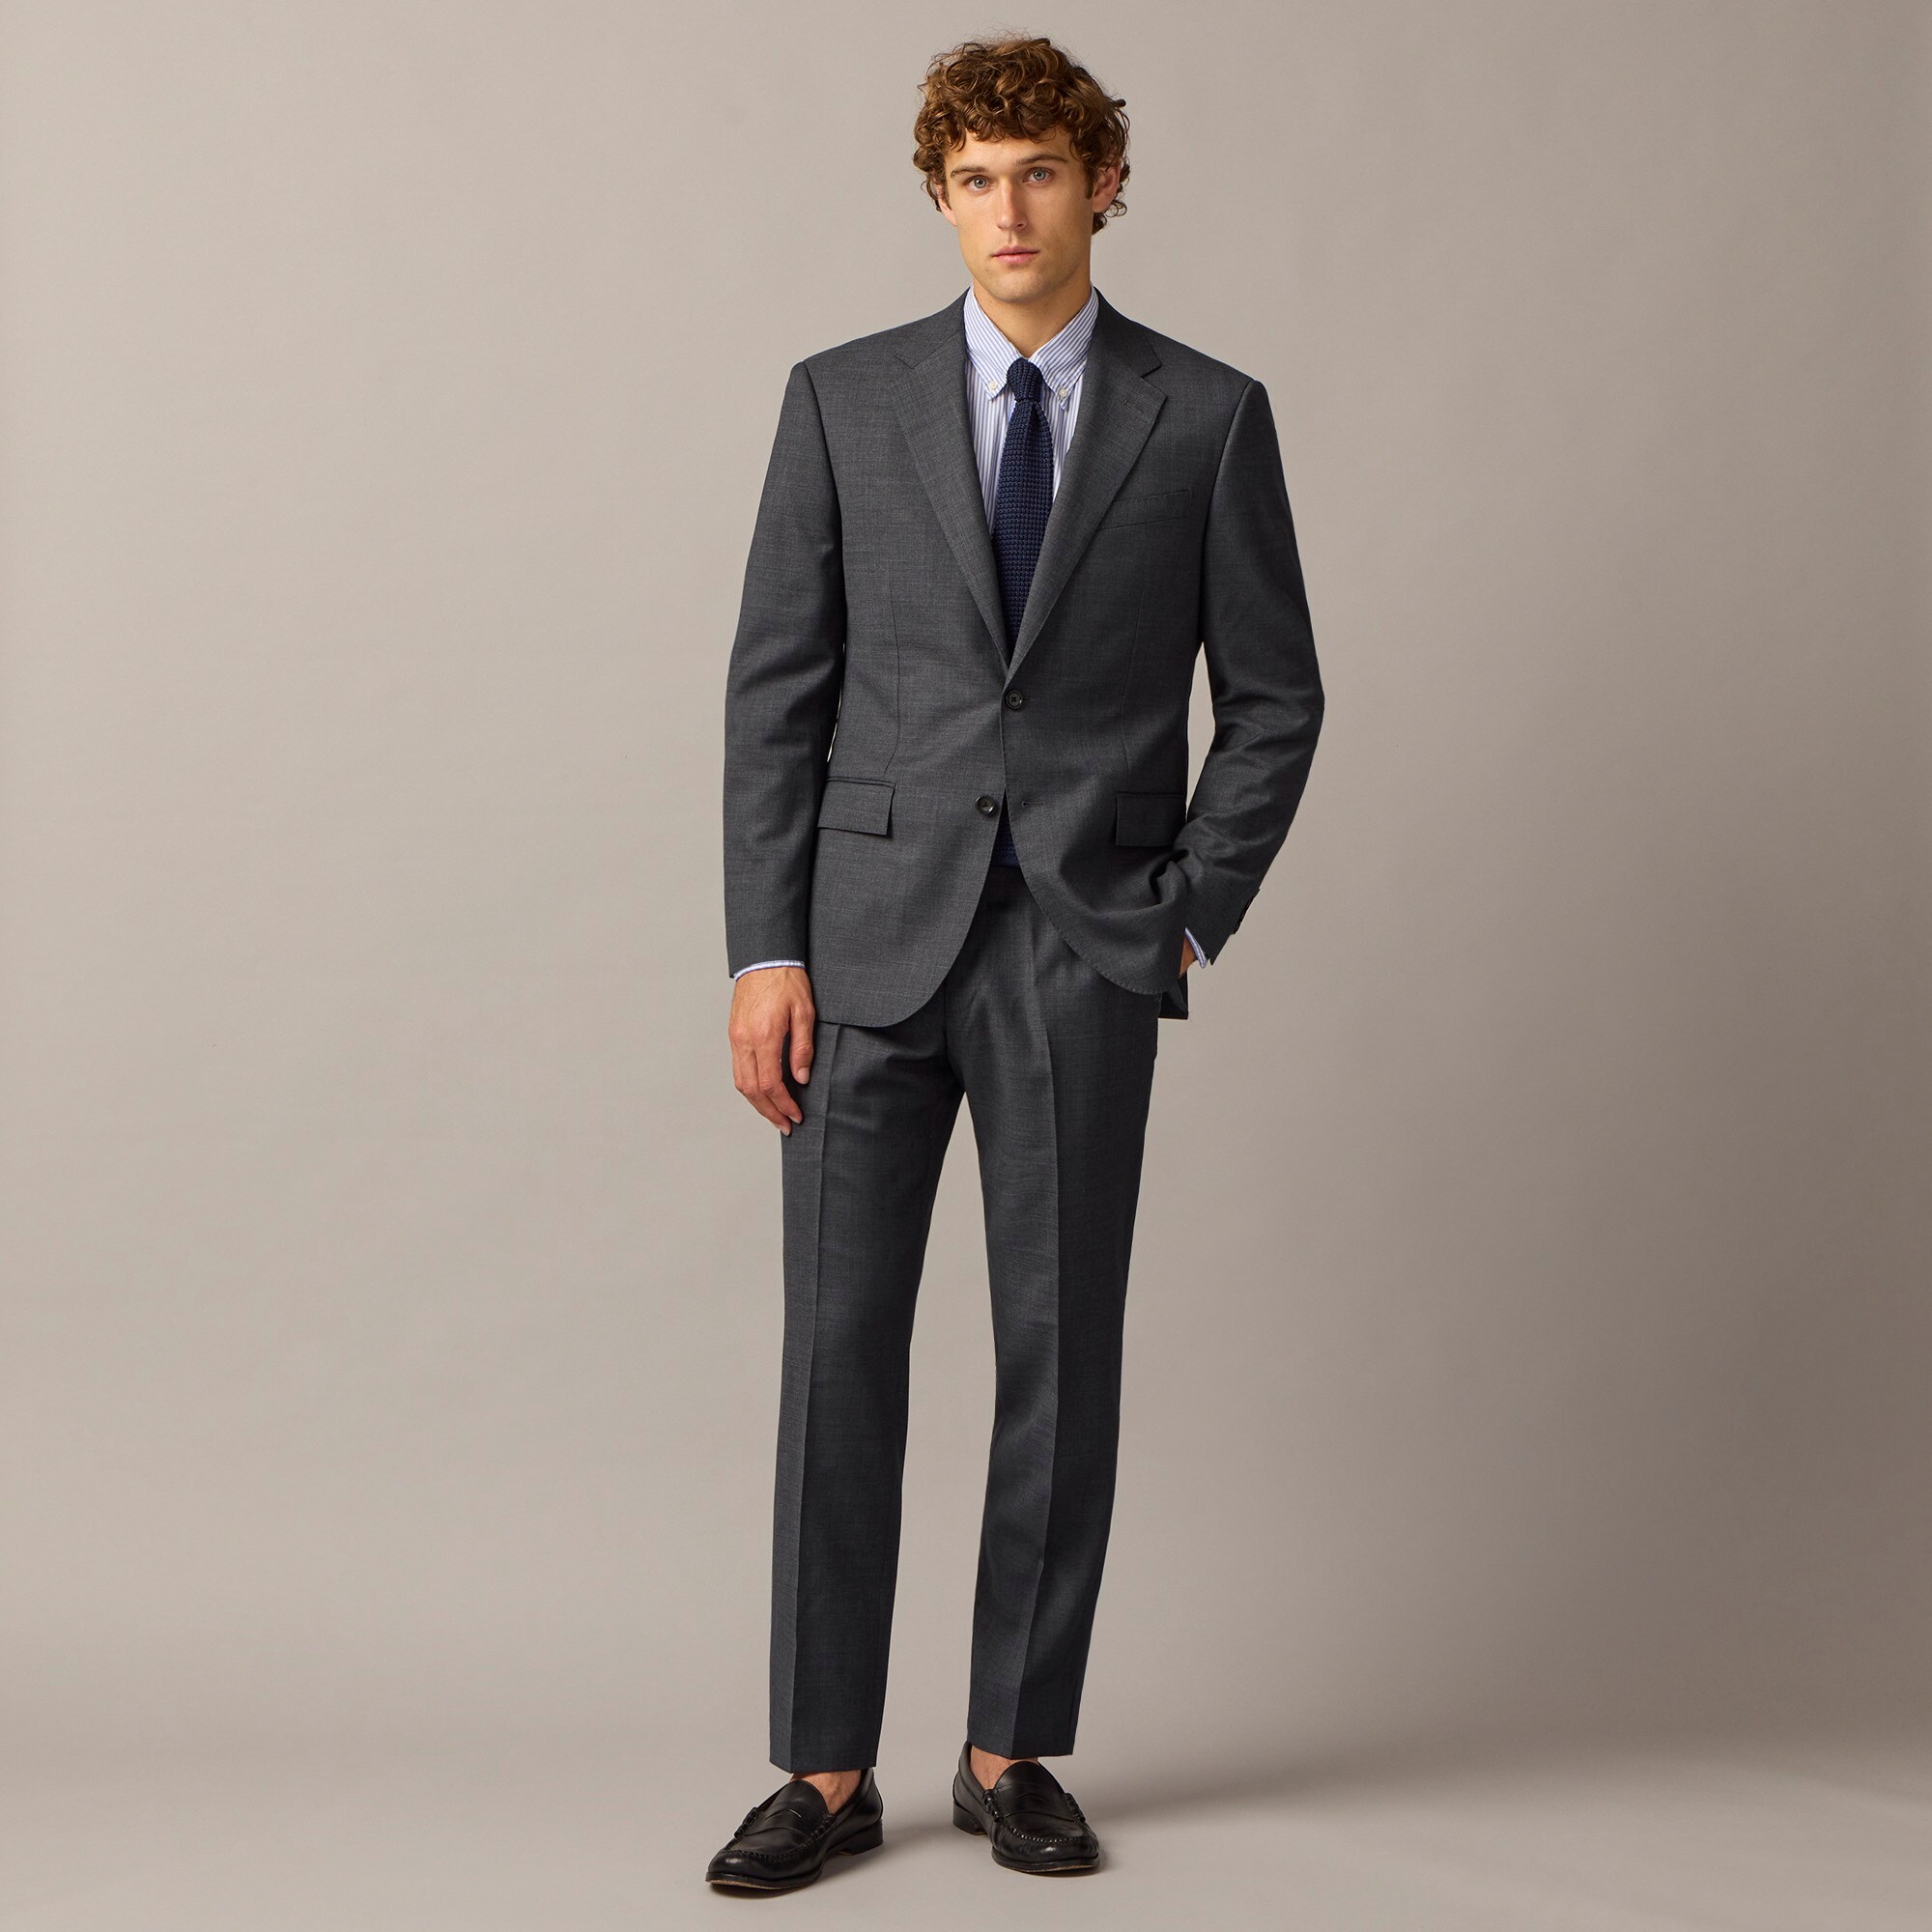  Crosby Classic-fit suit jacket in Italian stretch worsted wool blend